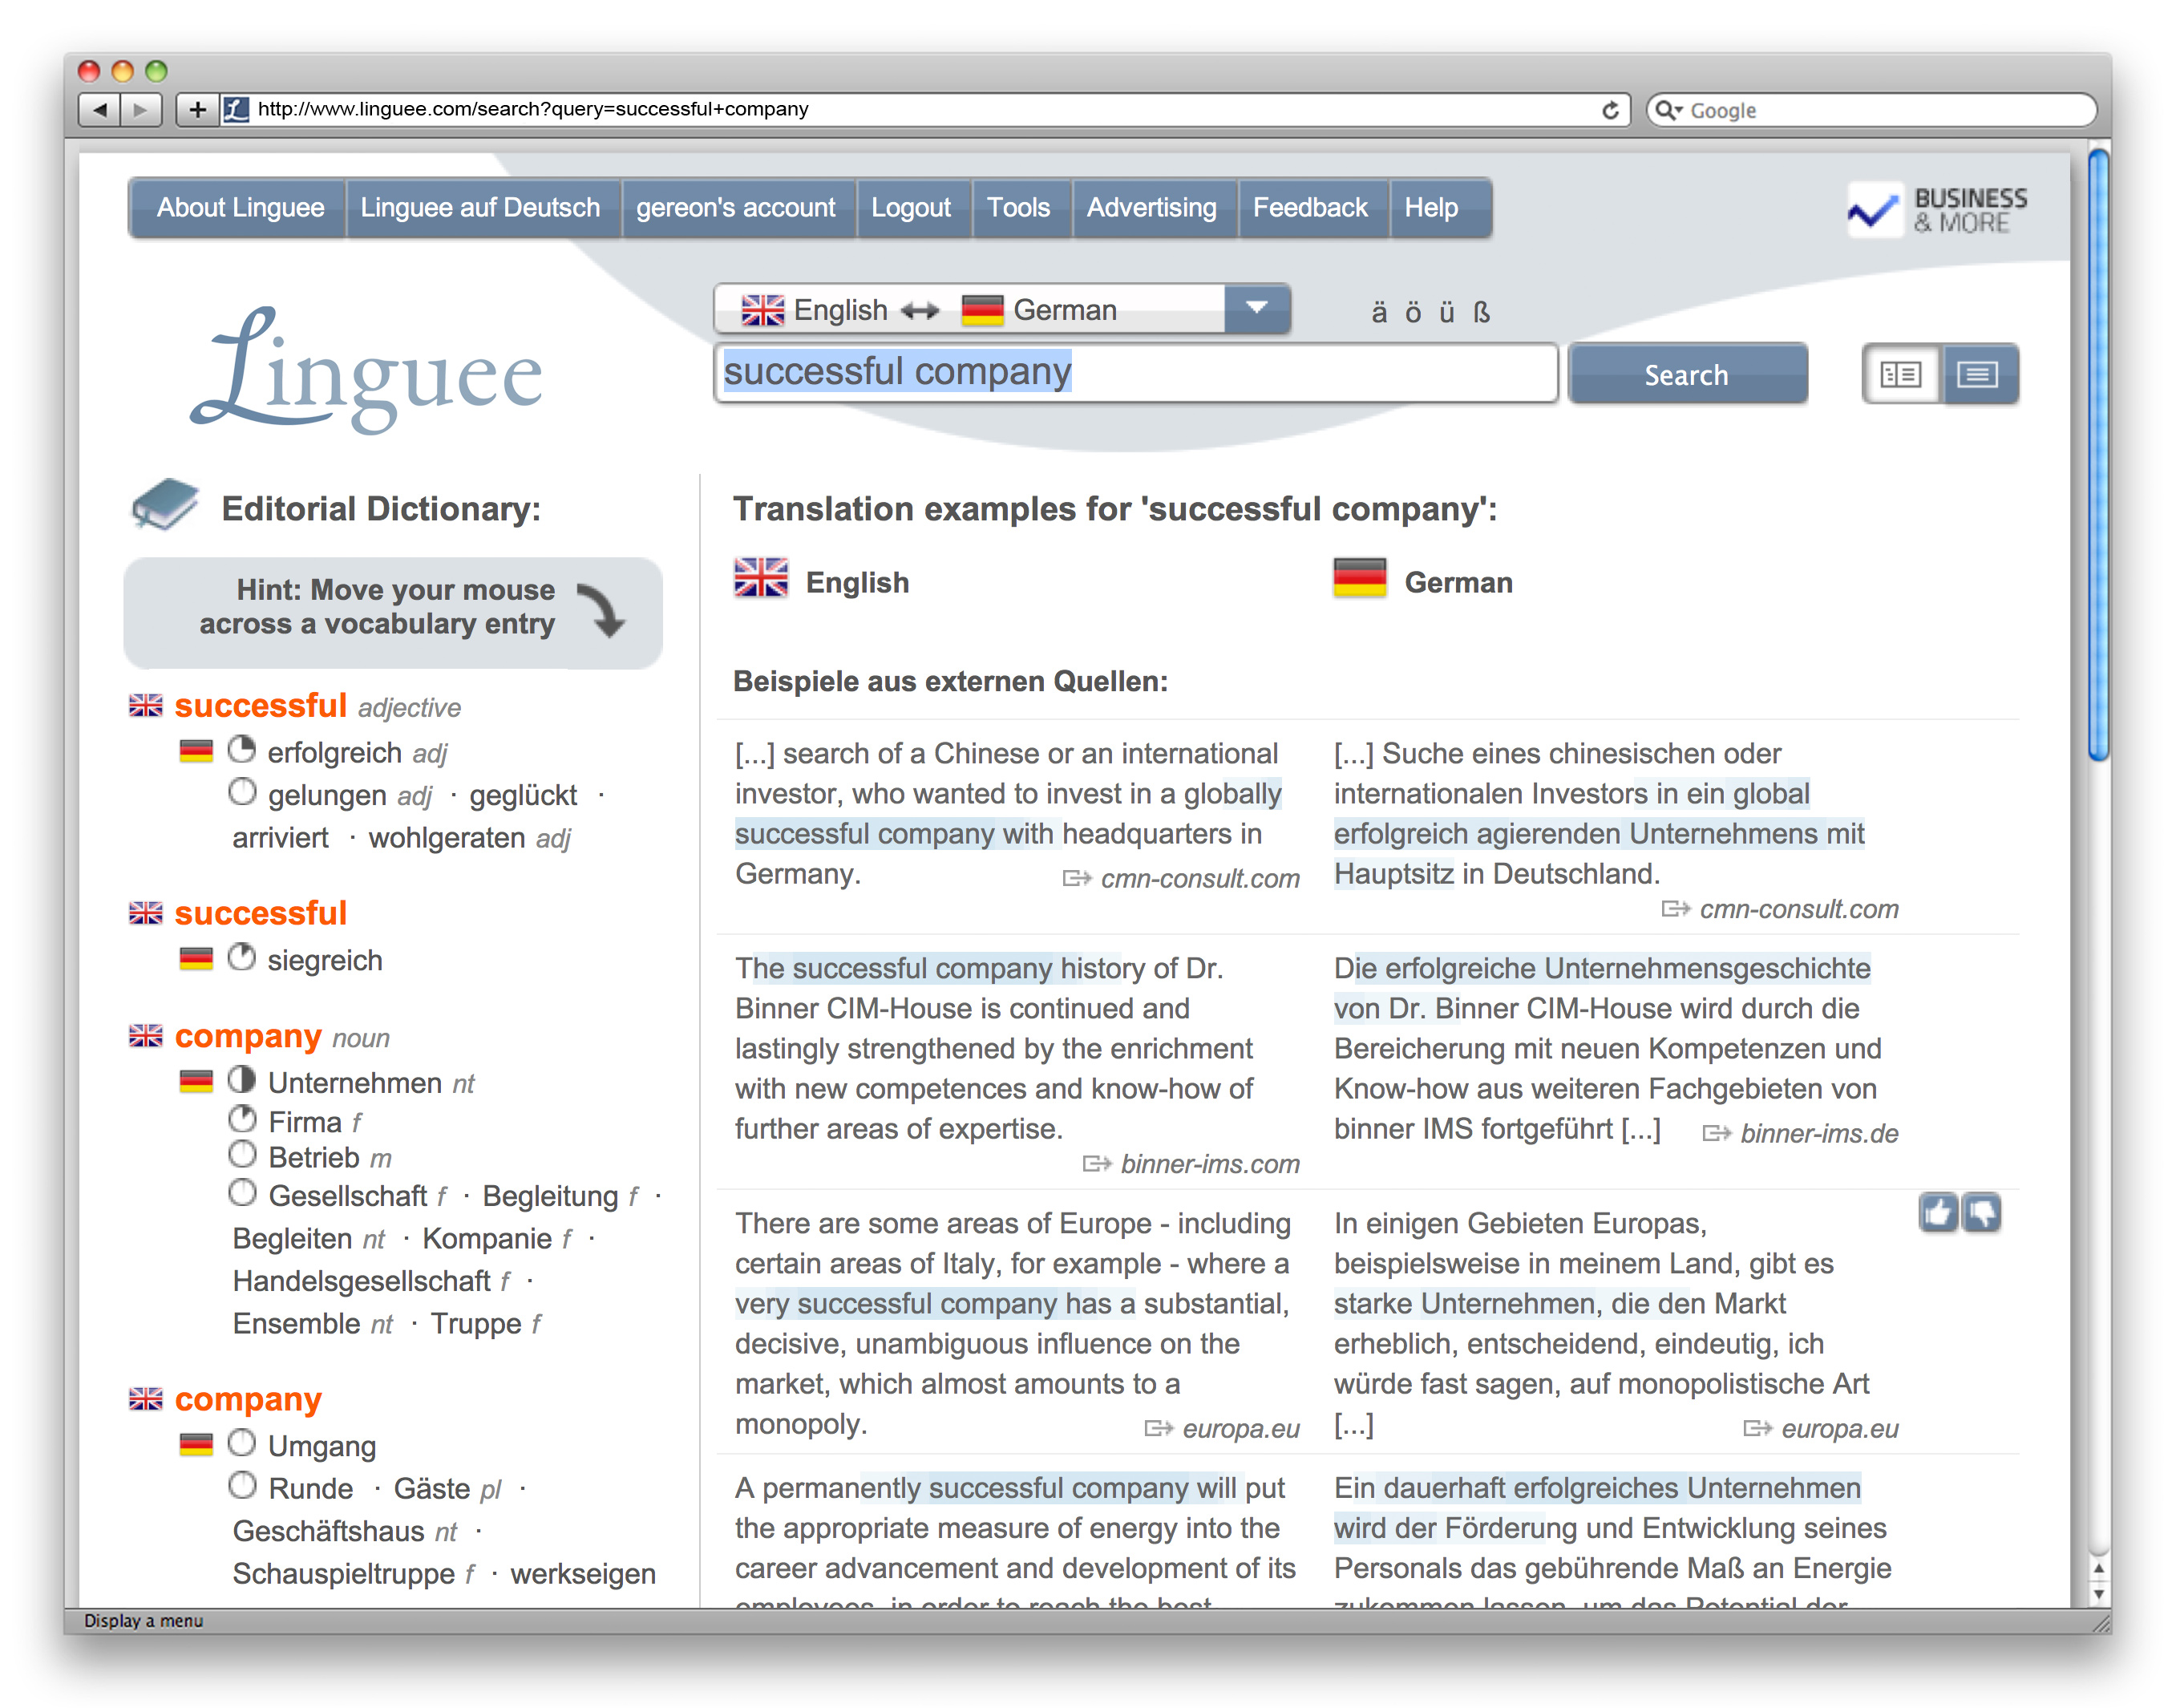 Ryazan, Russia - June 17, 2018: Homepage Of Linguee Website On The Display  Of PC, Url - Linguee.fr Stock Photo, Picture and Royalty Free Image. Image  110804422.